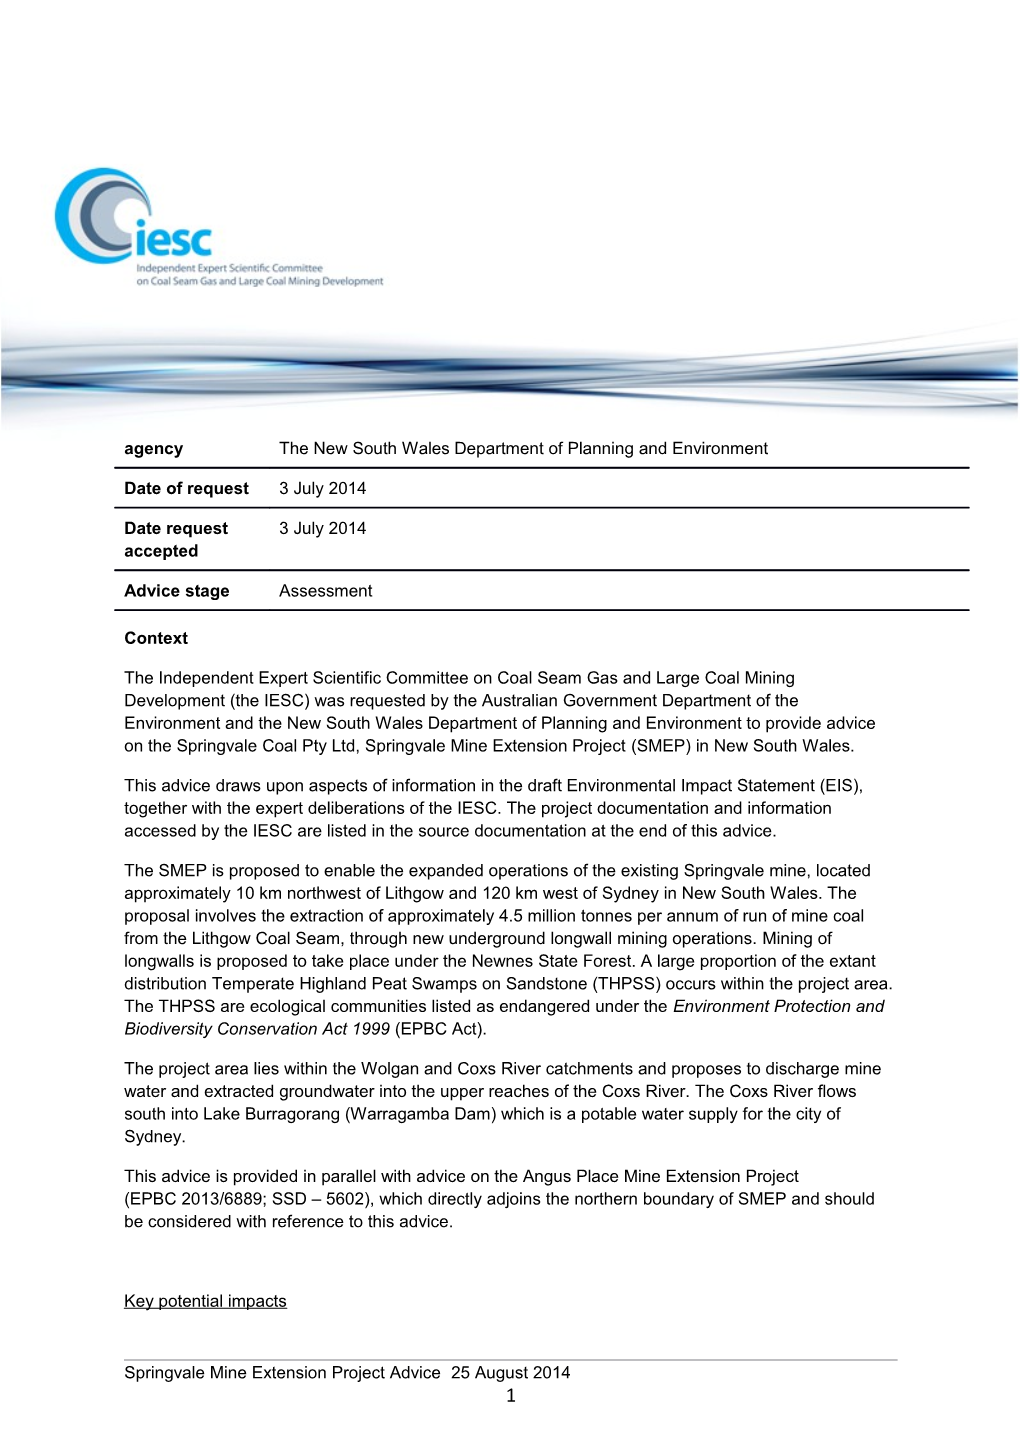 Advice to Decision Maker on Coal Mining Project IESC 2014-054: Springvale Mine Extension